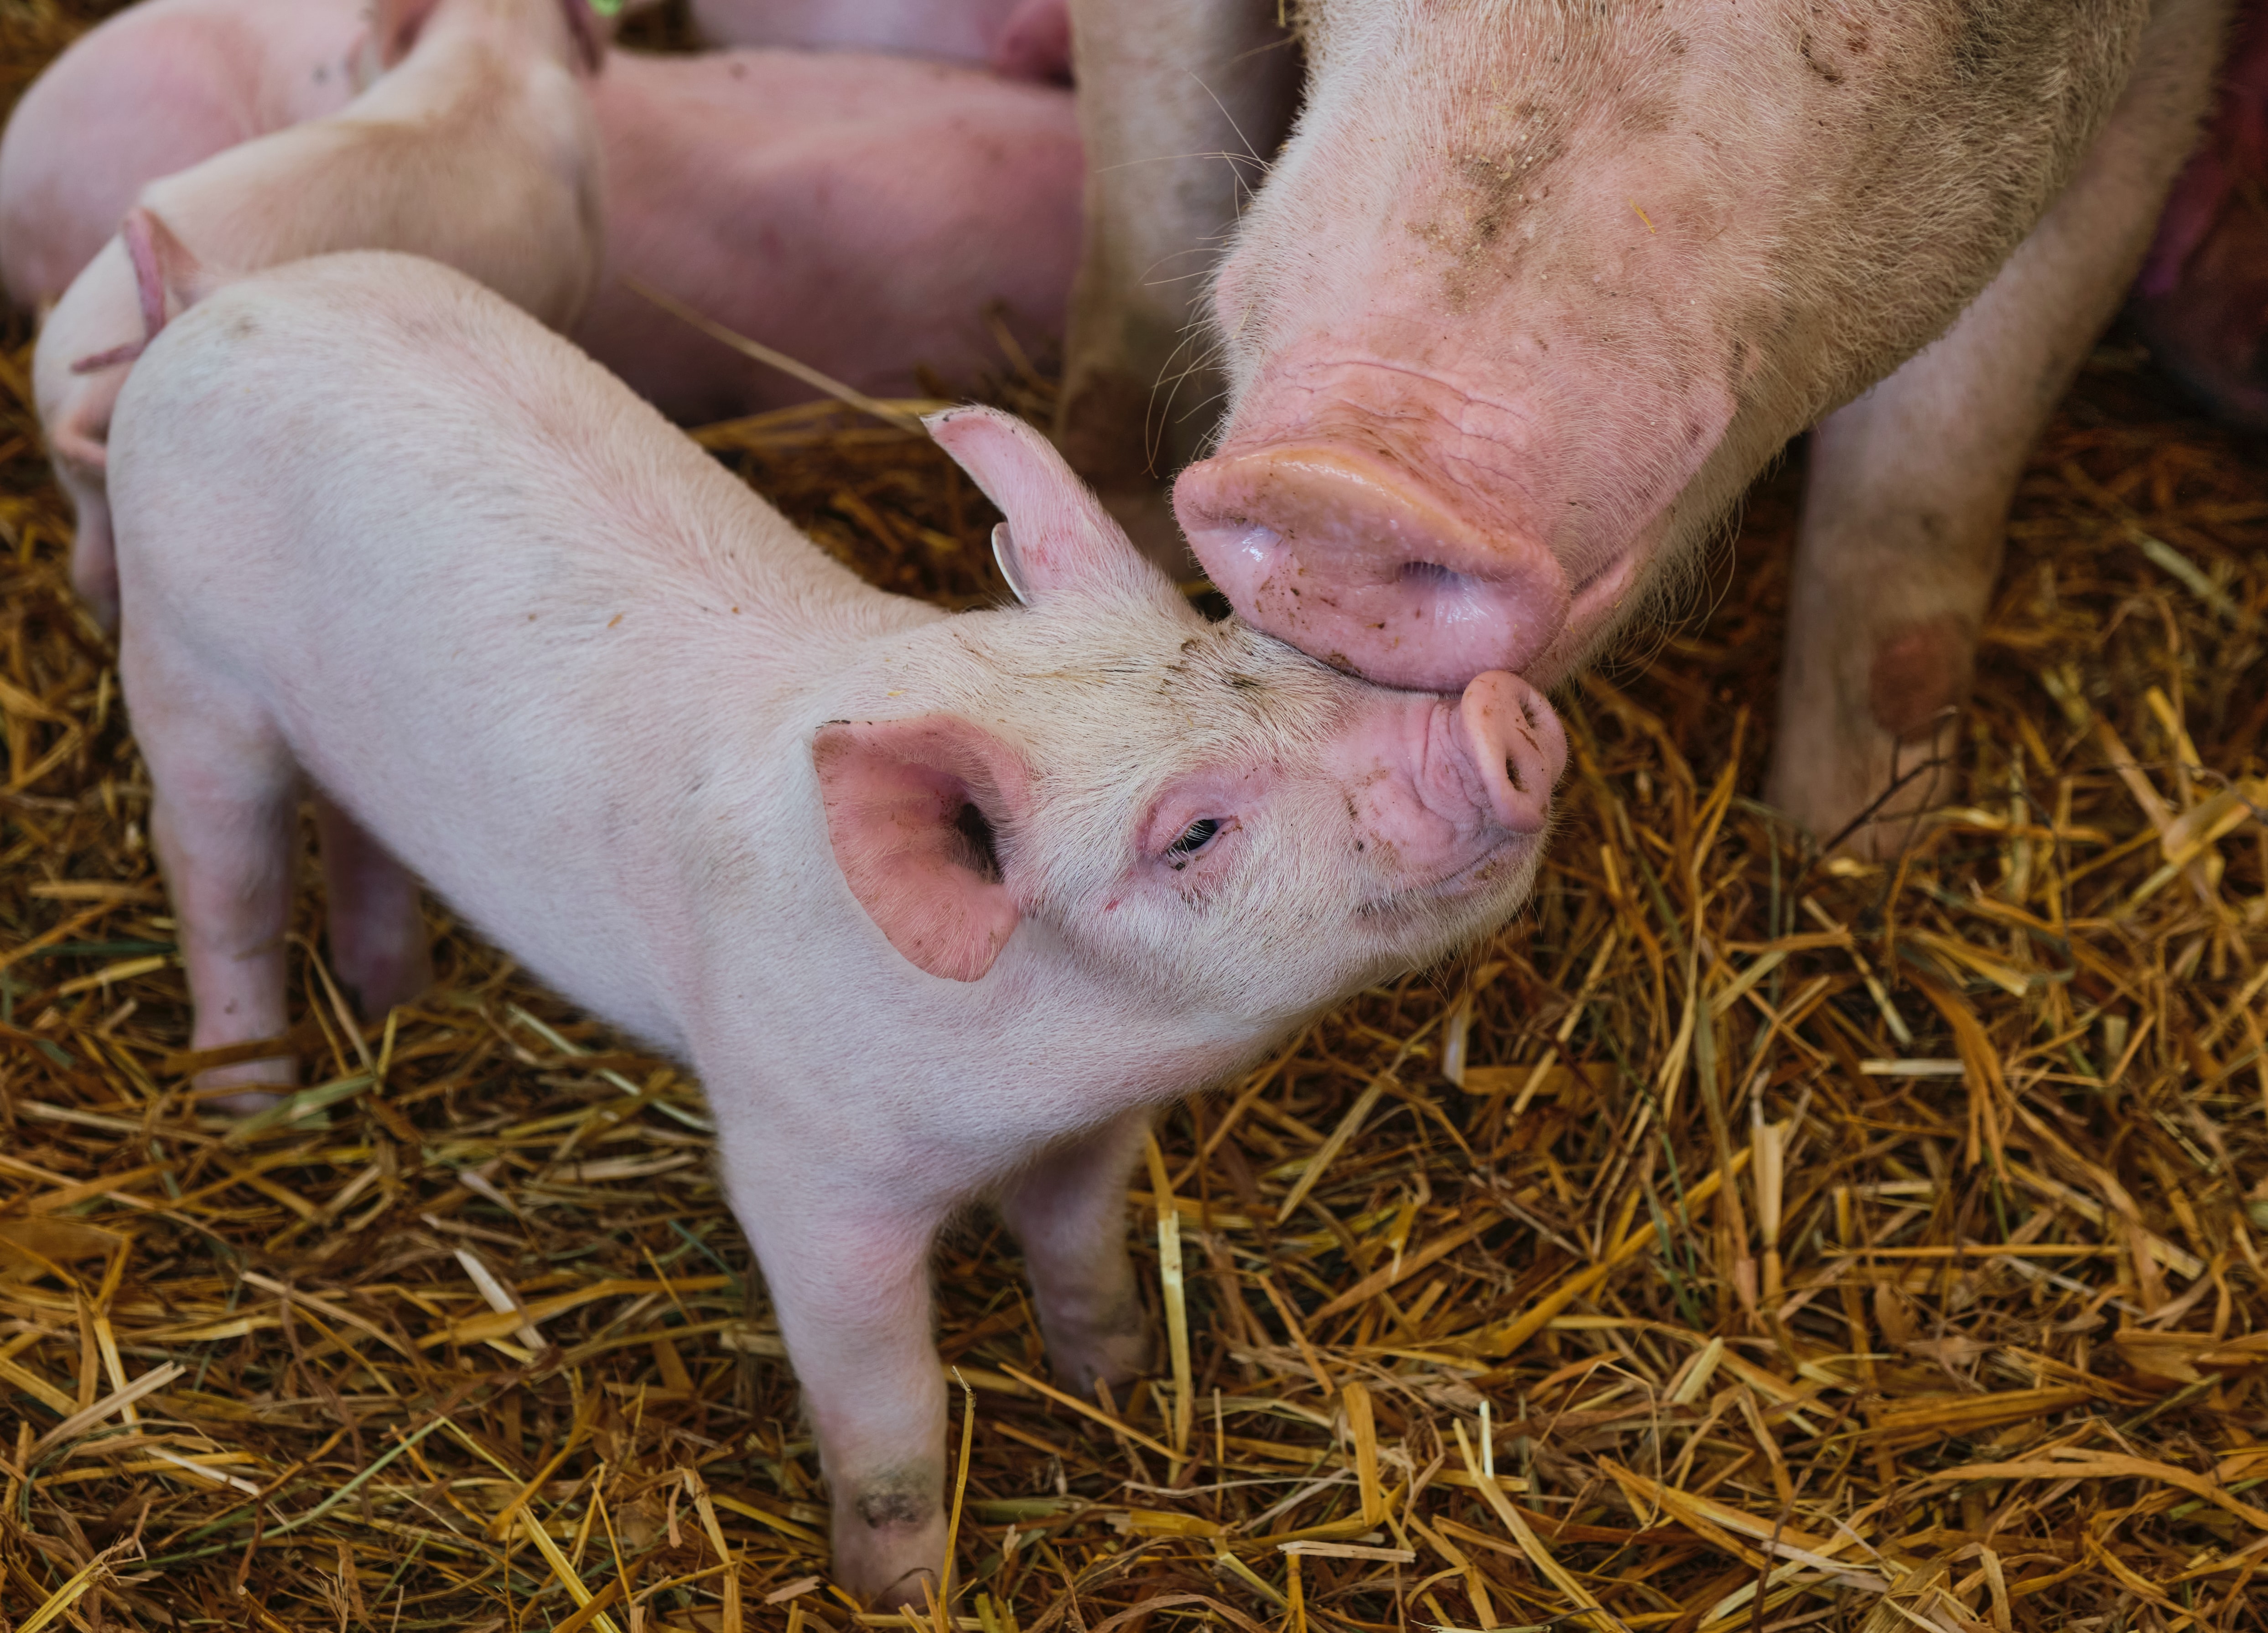 A presumed mother pig nuzzles a young pig&#039;s head with her snout.